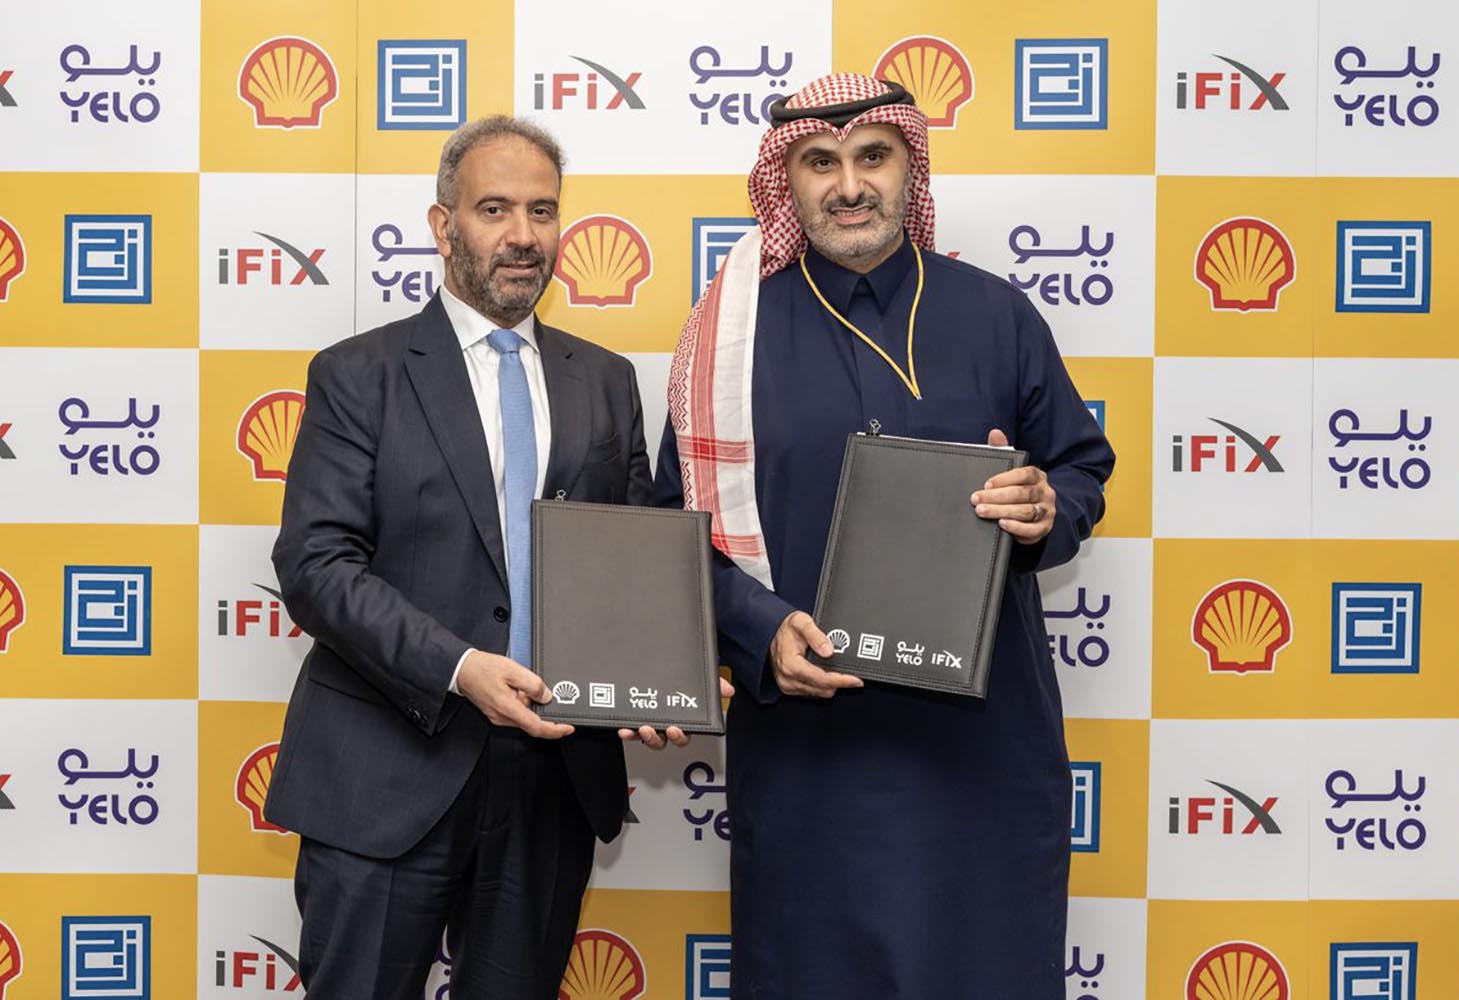 JOSLOC to supply “Yelo” maintenance centers with Shell lubricants